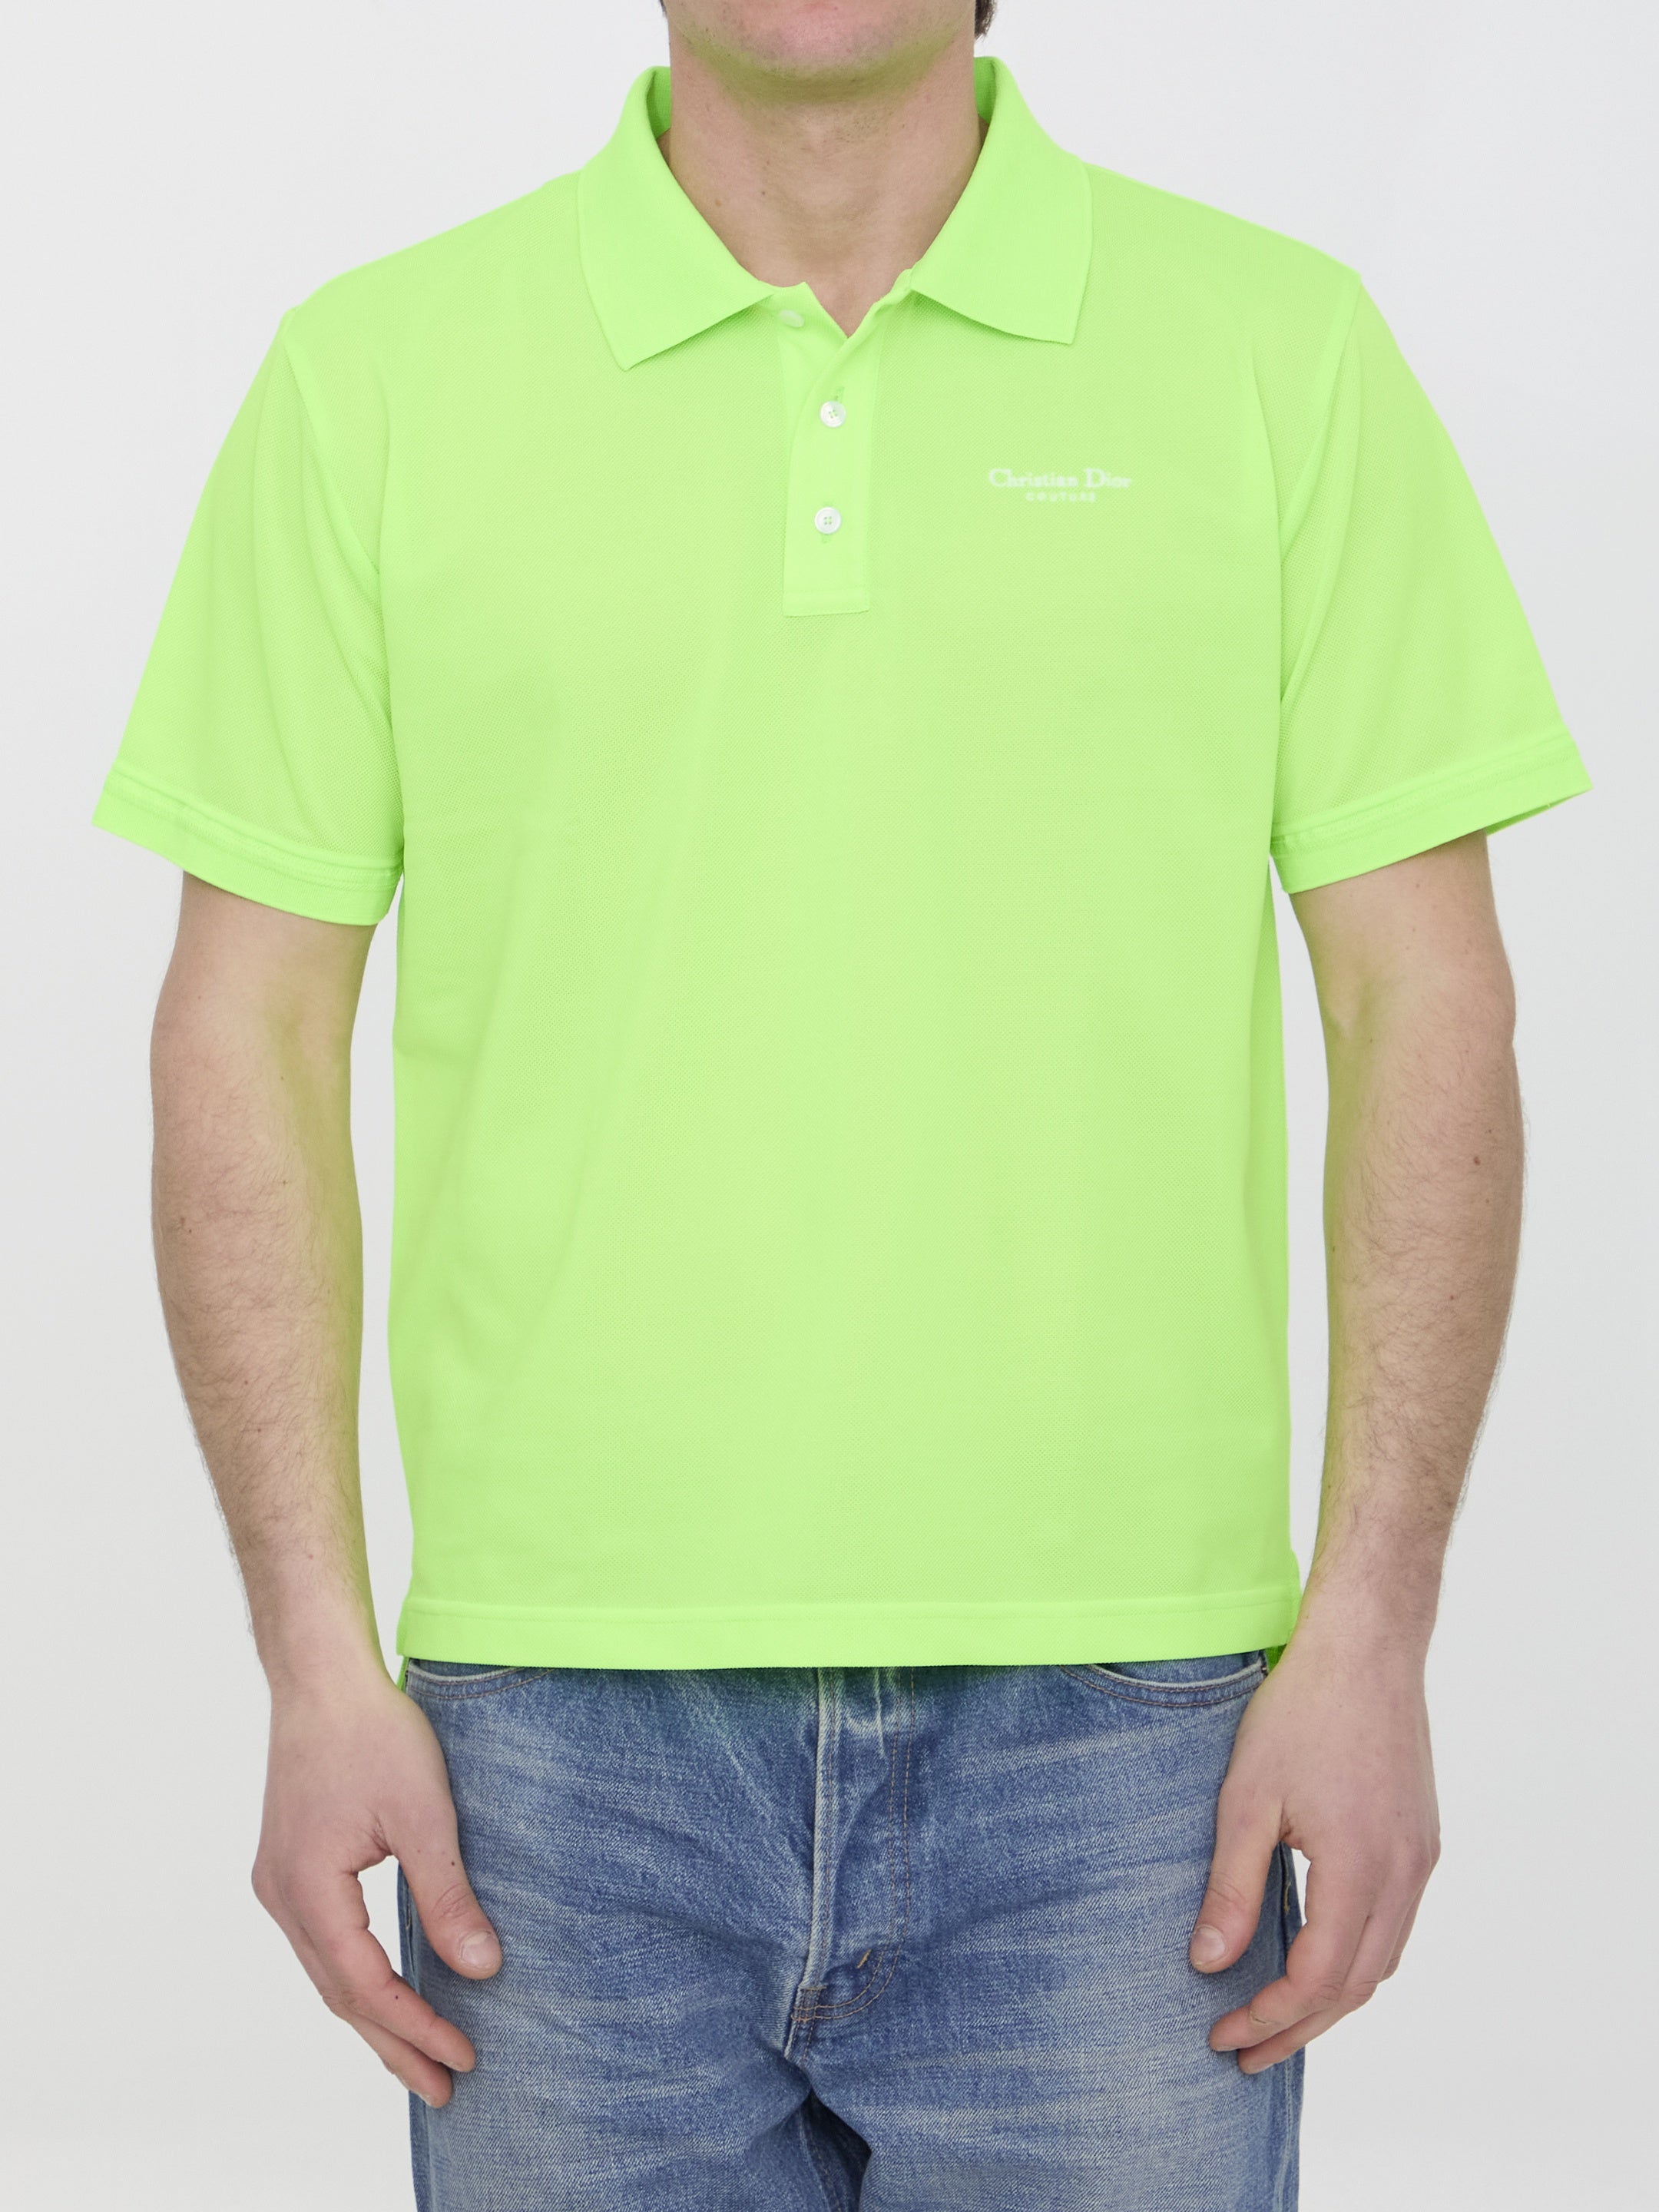 DIOR-HOMME-OUTLET-SALE-Christian-Dior-Couture-polo-shirt-Shirts-M-GREEN-ARCHIVE-COLLECTION.jpg